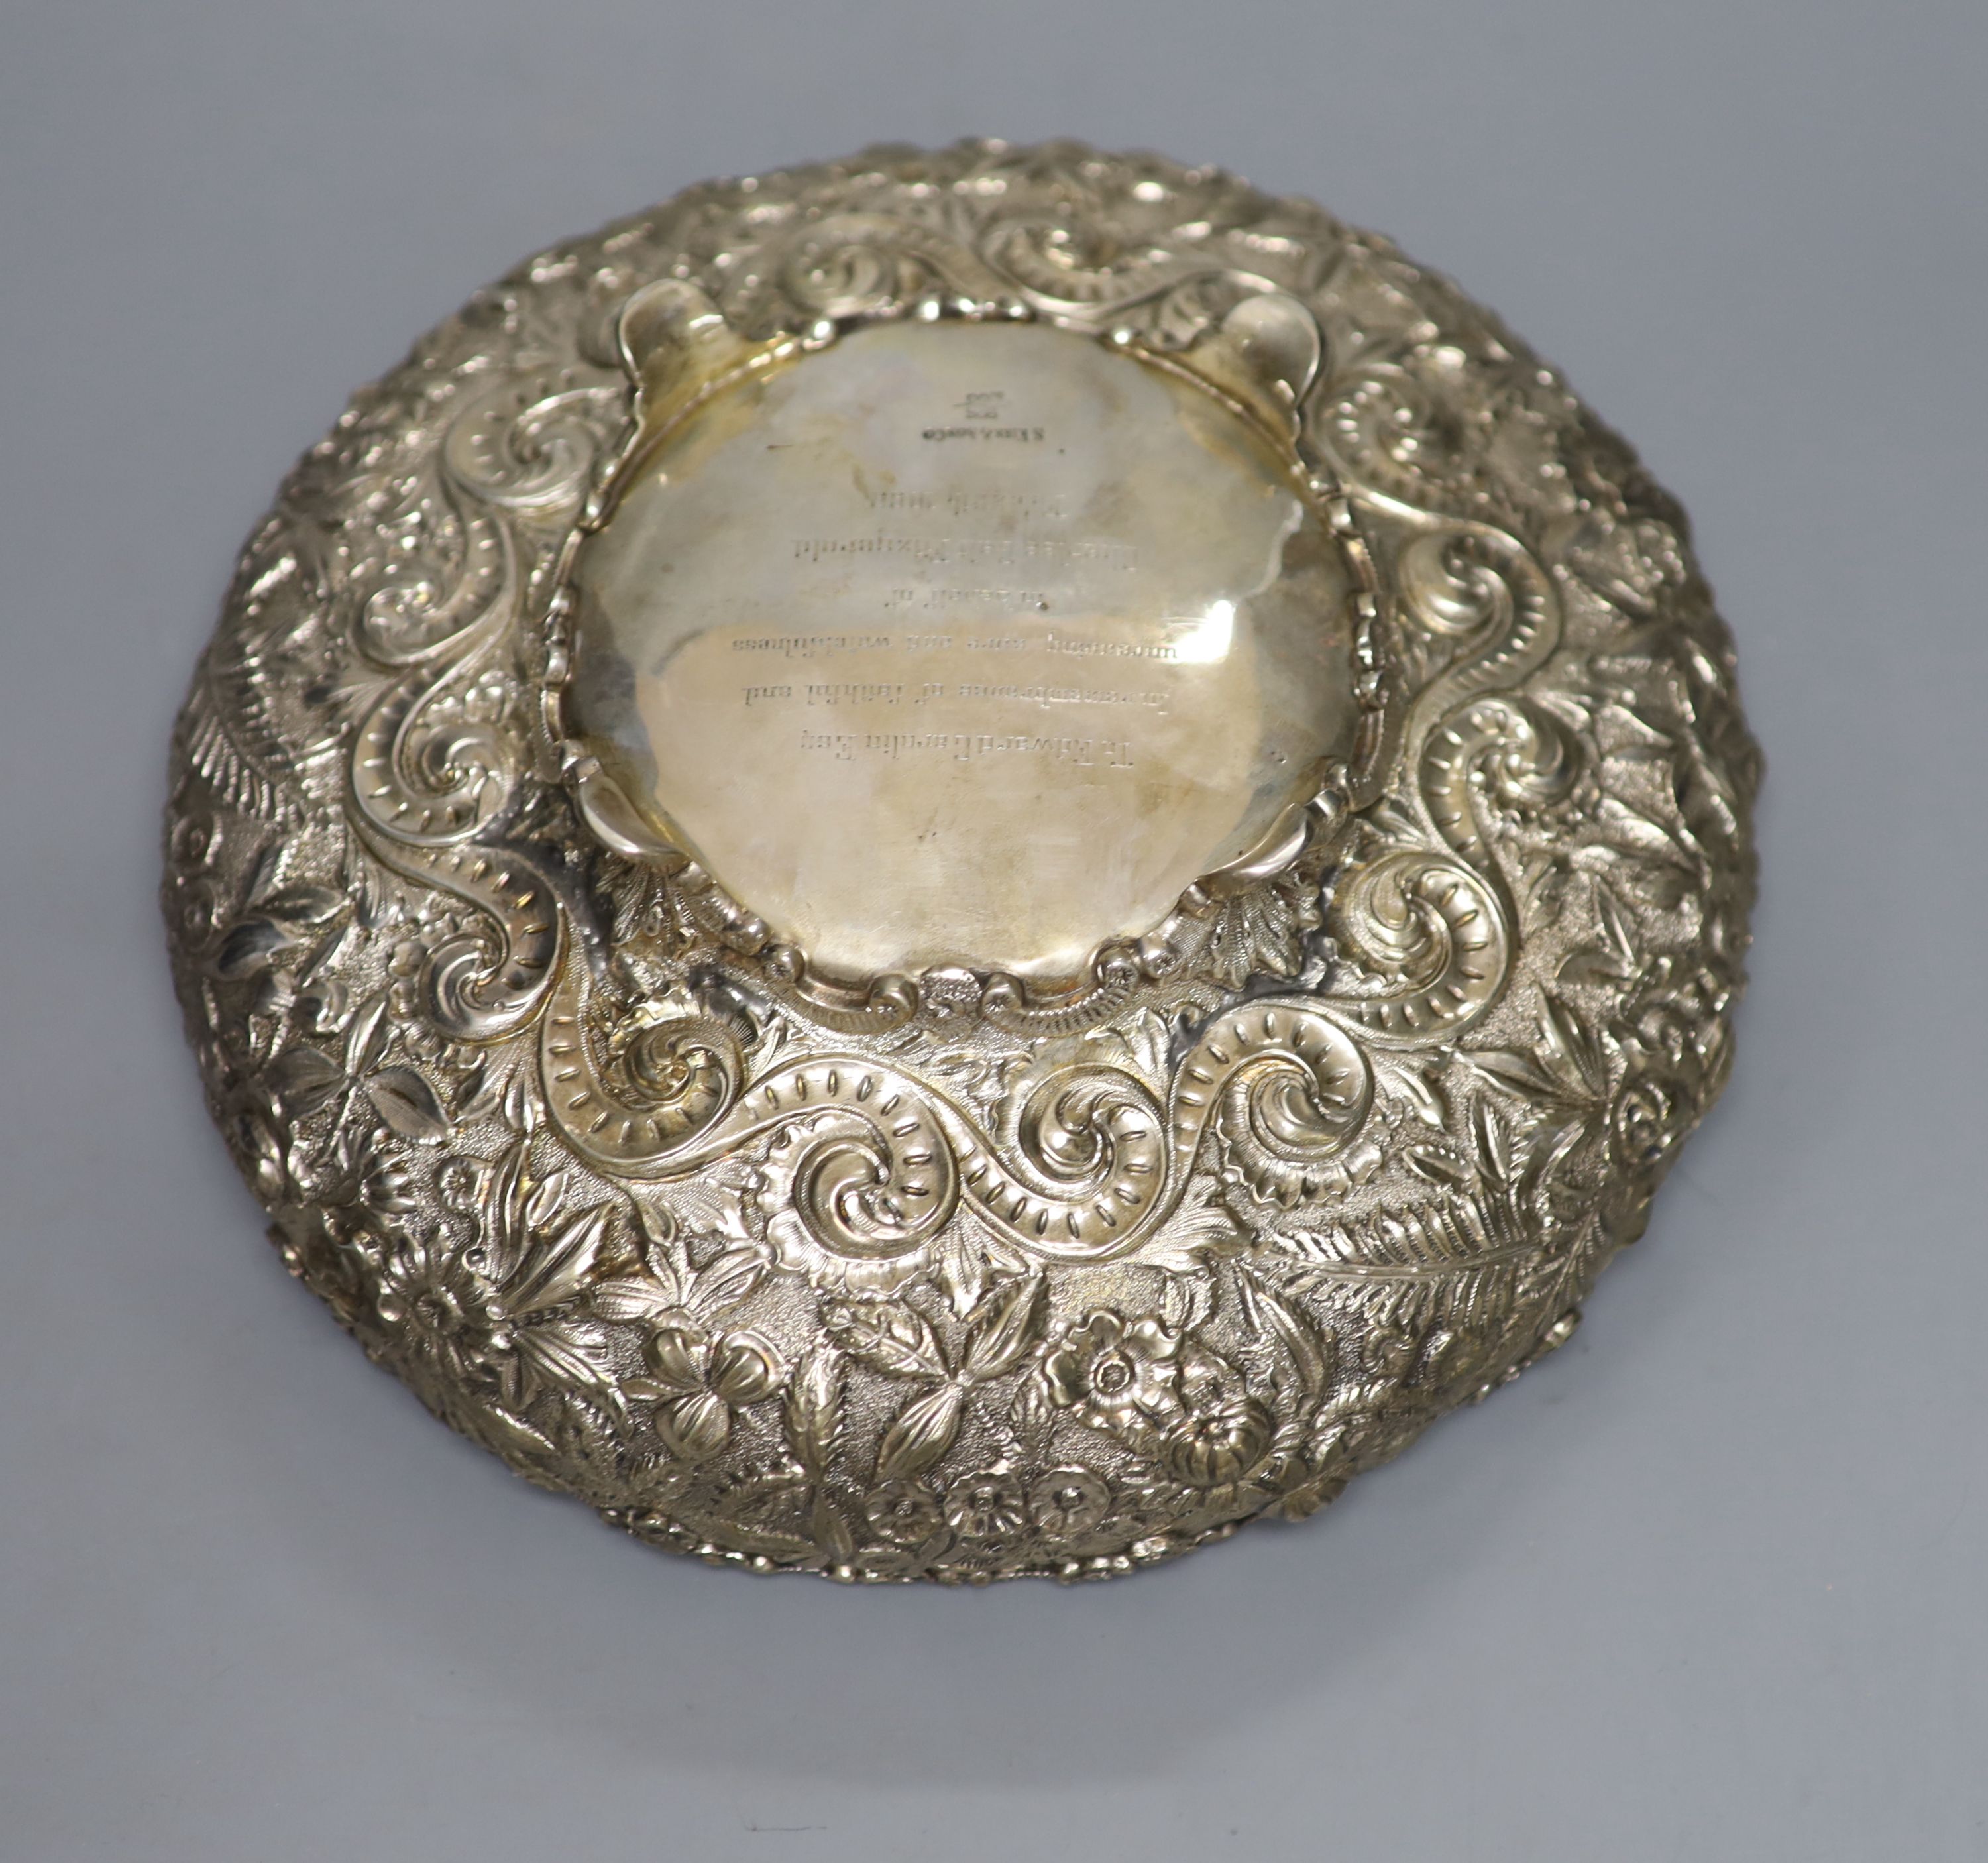 A late 19th century American embossed sterling fruit bowl by S. Kirk & Son Co, 23.5cm, 19.5oz.